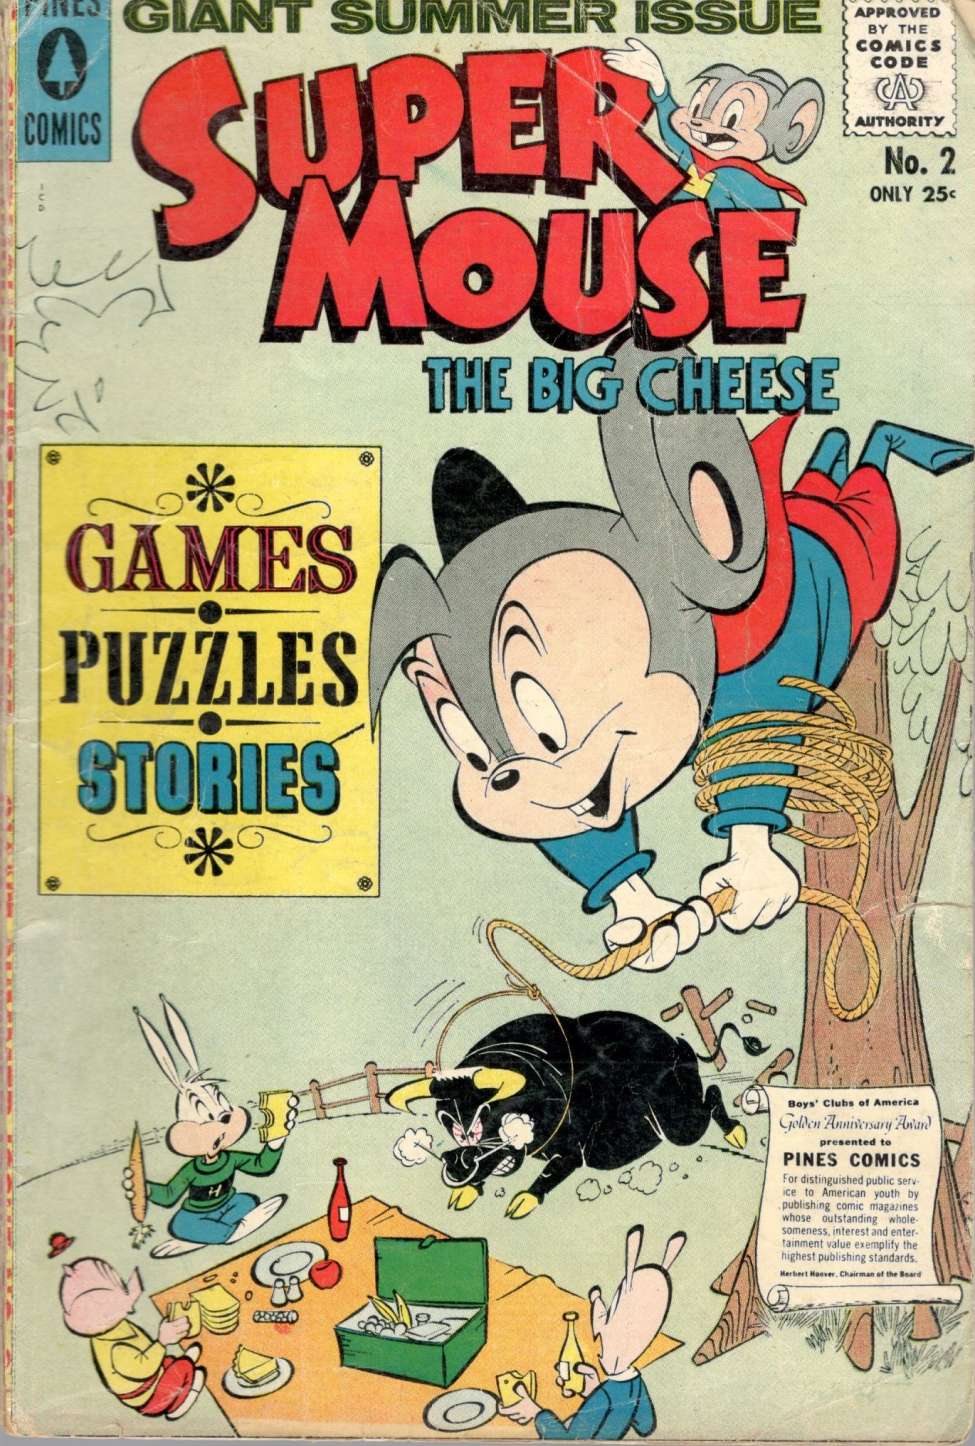 Comic Book Cover For Supermouse, the Big Cheese, Giant Summer Issue